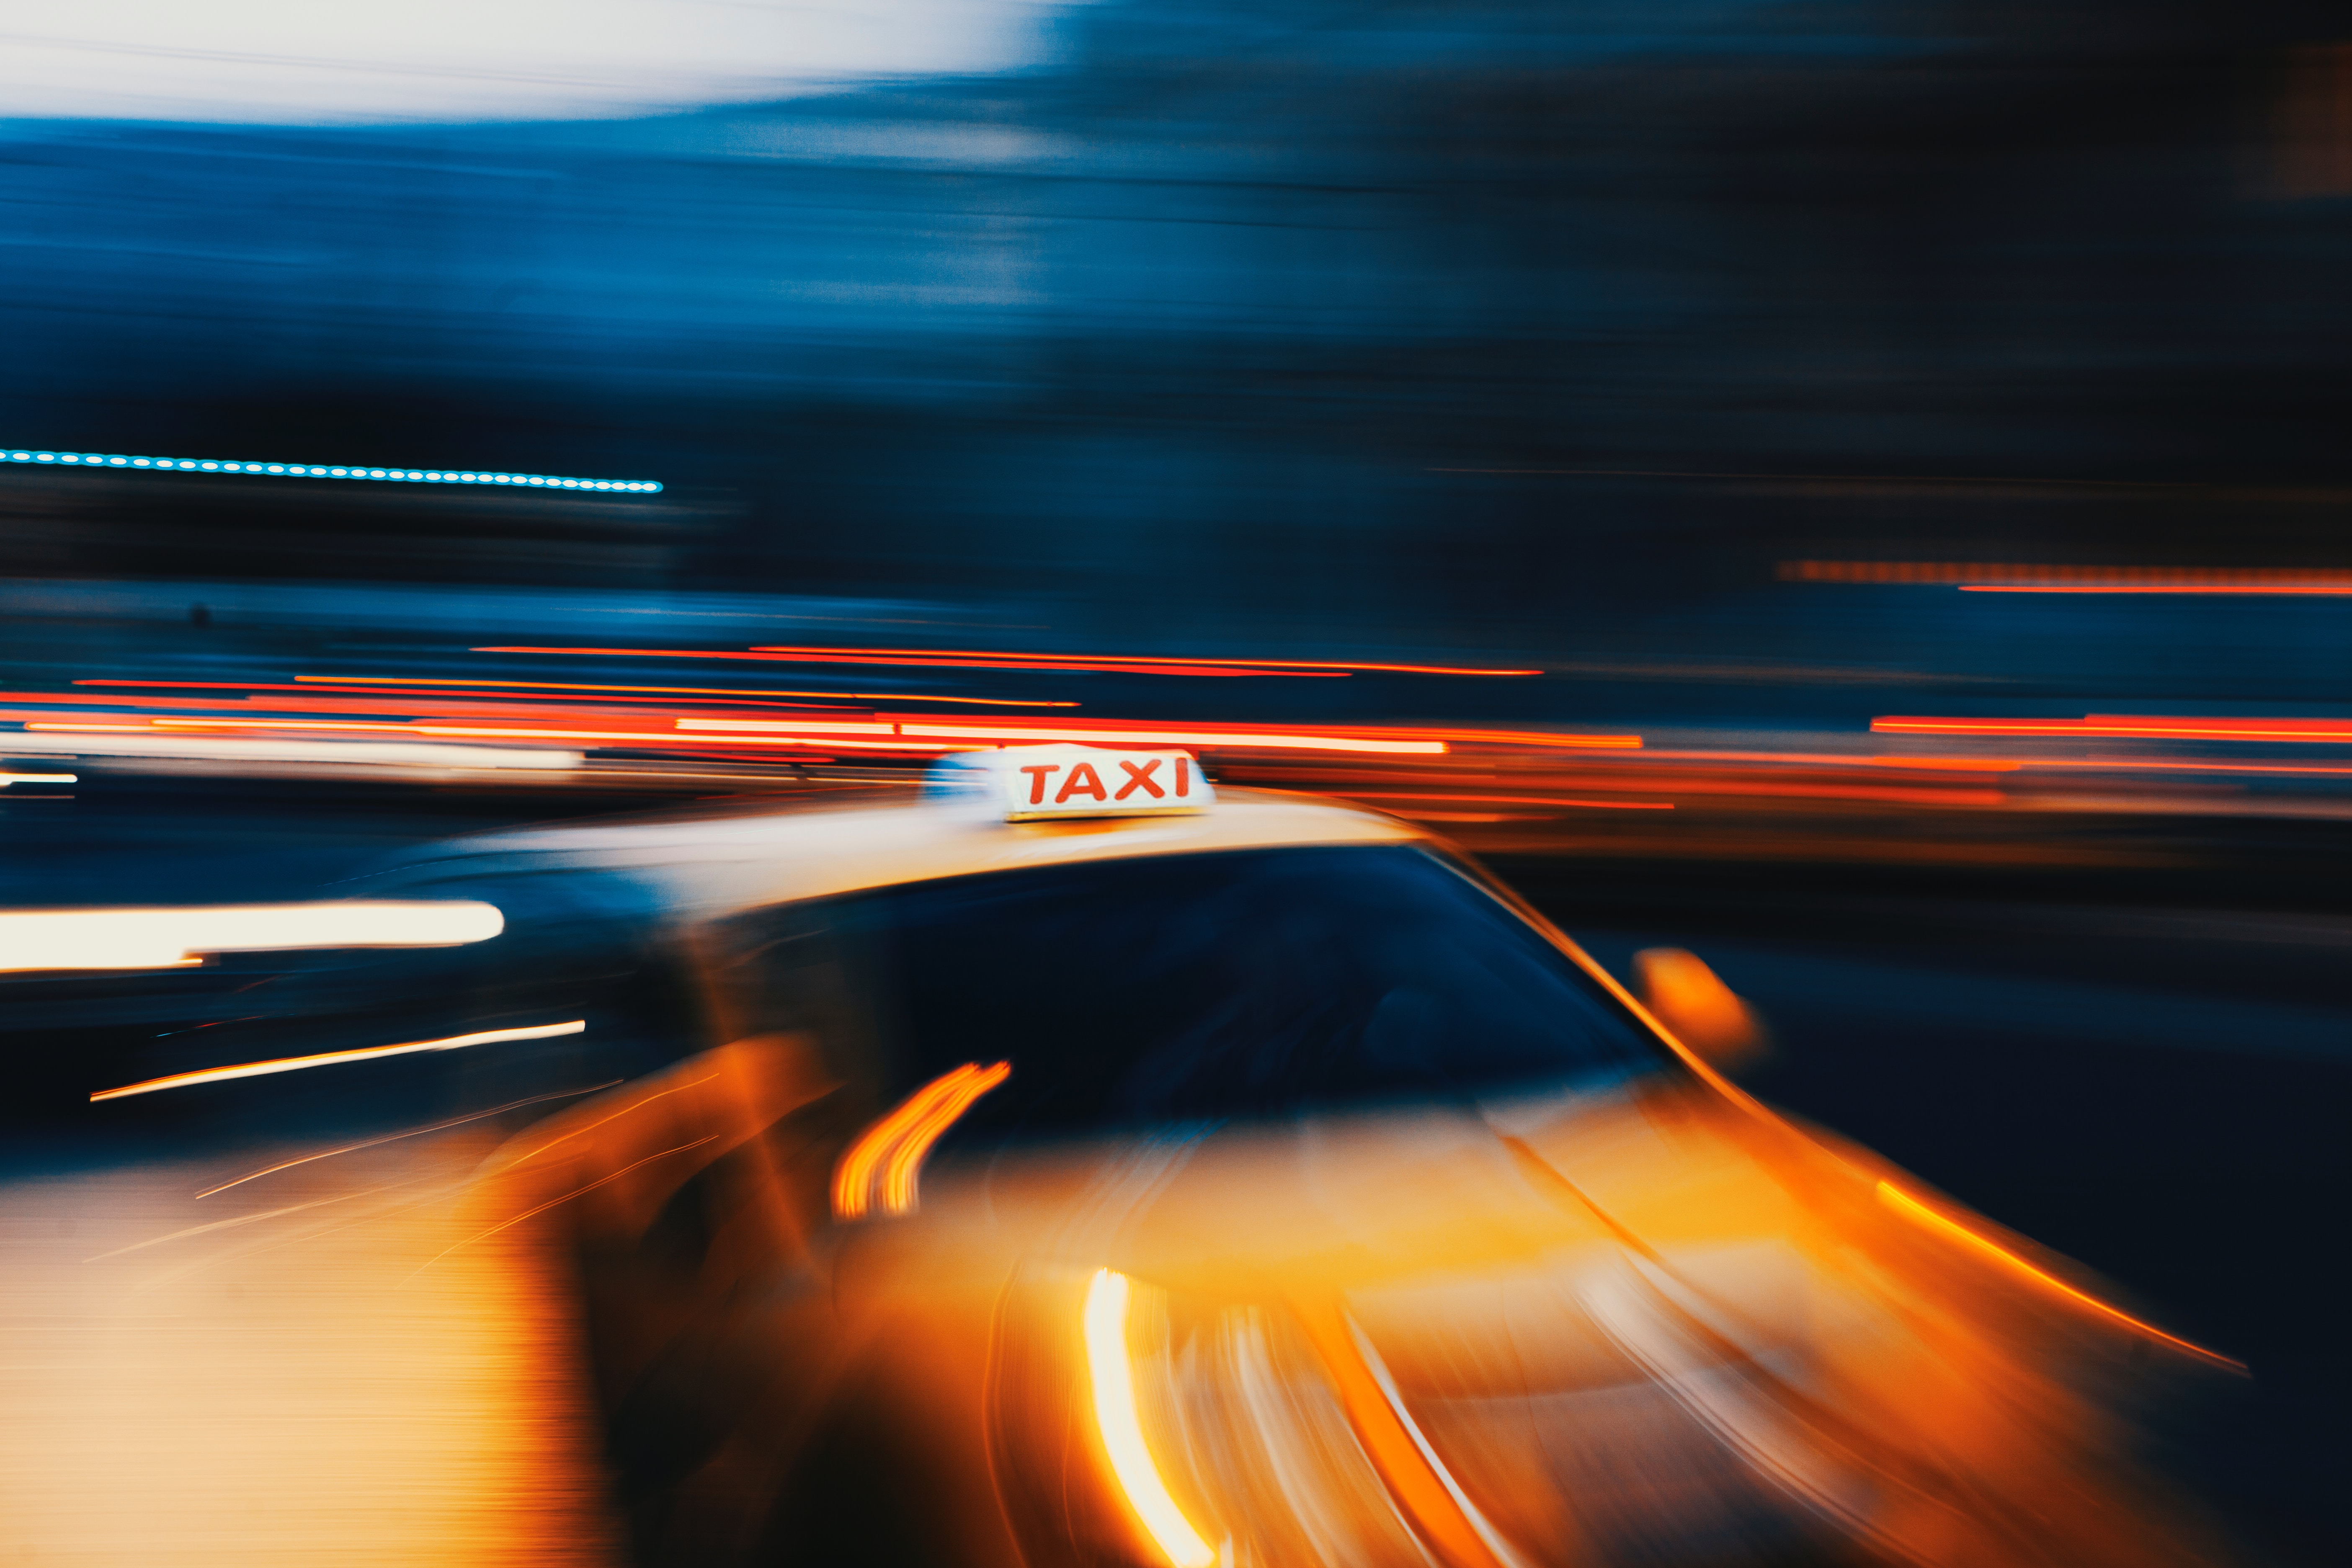 long exposure, taxi, shine, light, miscellanea, miscellaneous, traffic, movement, blur, smooth lock screen backgrounds